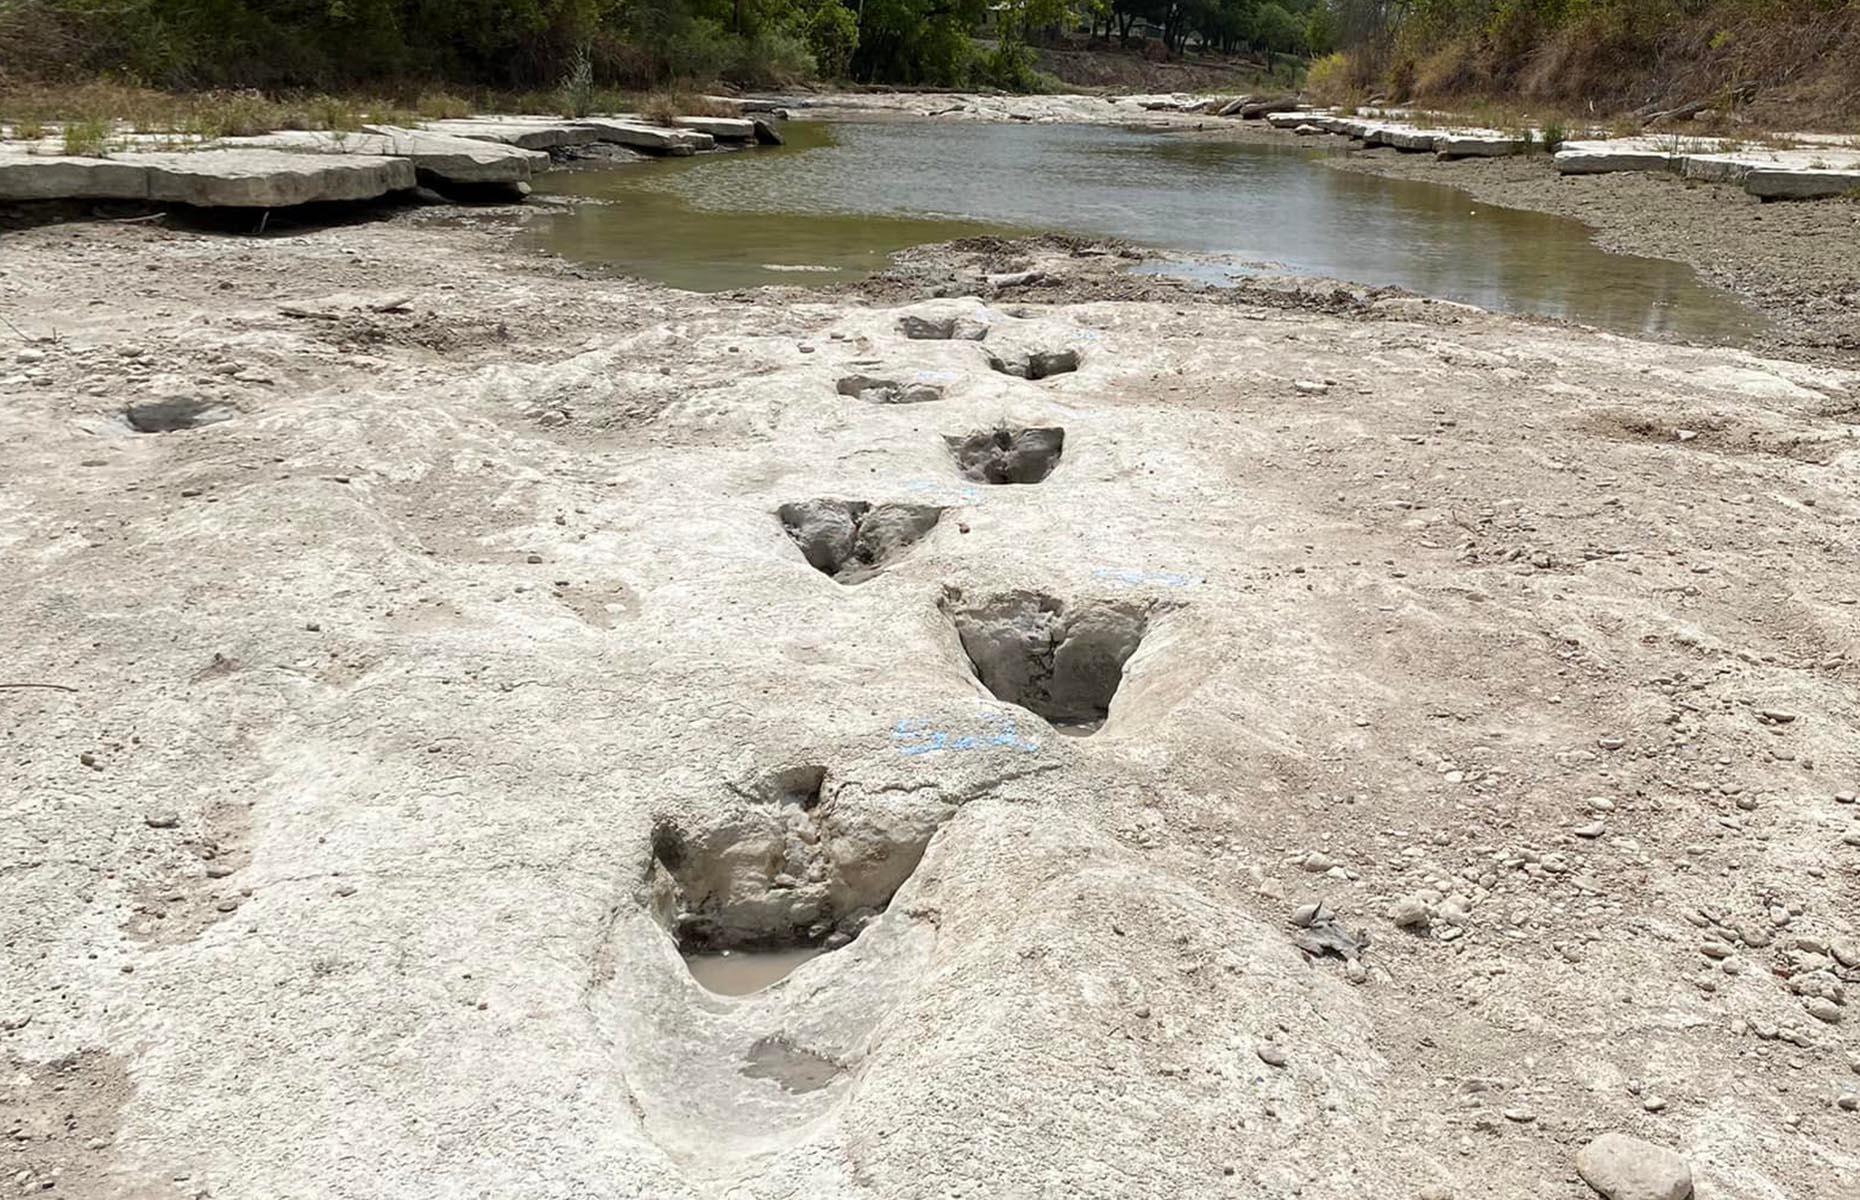 <p>Following severe drought conditions in Texas, USA, in August 2022, huge dinosaur tracks were discovered in a dried up muddy riverbed at Dinosaur Valley State Park. Said to belong to an Acrocanthosaurus, a 15-foot (5m) tall, seven-tonne early cousin of the T-rex, the tracks are around 113 million years old. Another species, the Sauroposeidon, measuring 60 feet tall (18m) and weighing a whopping 44 tonnes, is also likely to be responsible for some of the footprints, according to experts. Although the park is famed for its dinosaur tracks, this is the first time these particular footprints have been seen.</p>